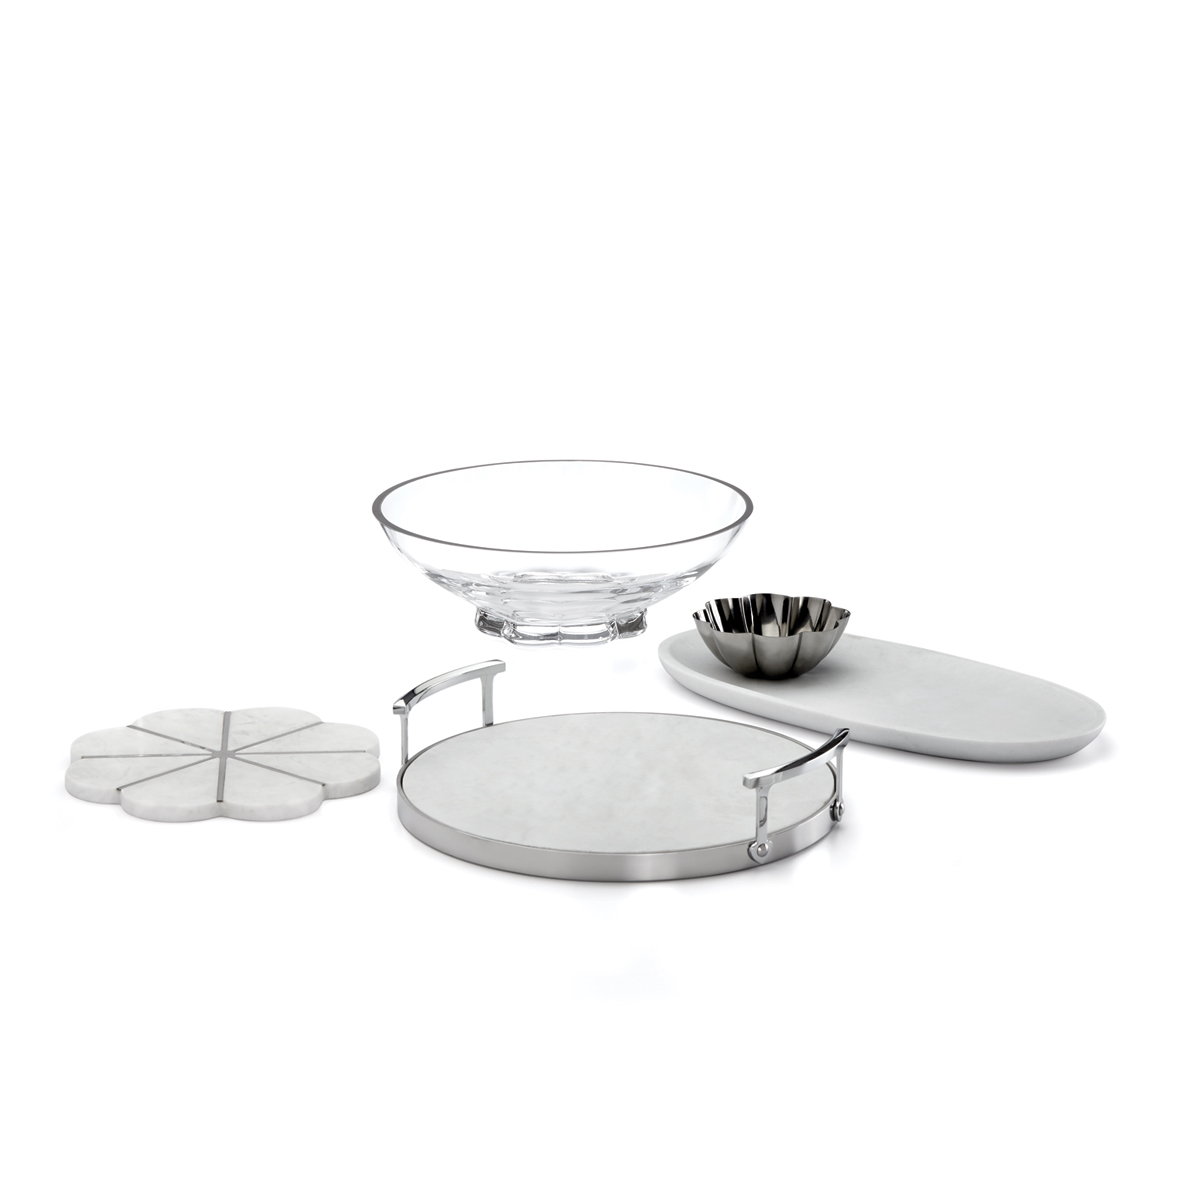 Kate Spade New York, Lenox Gramercy Marble and Metal Oval Platter and Bowl Set